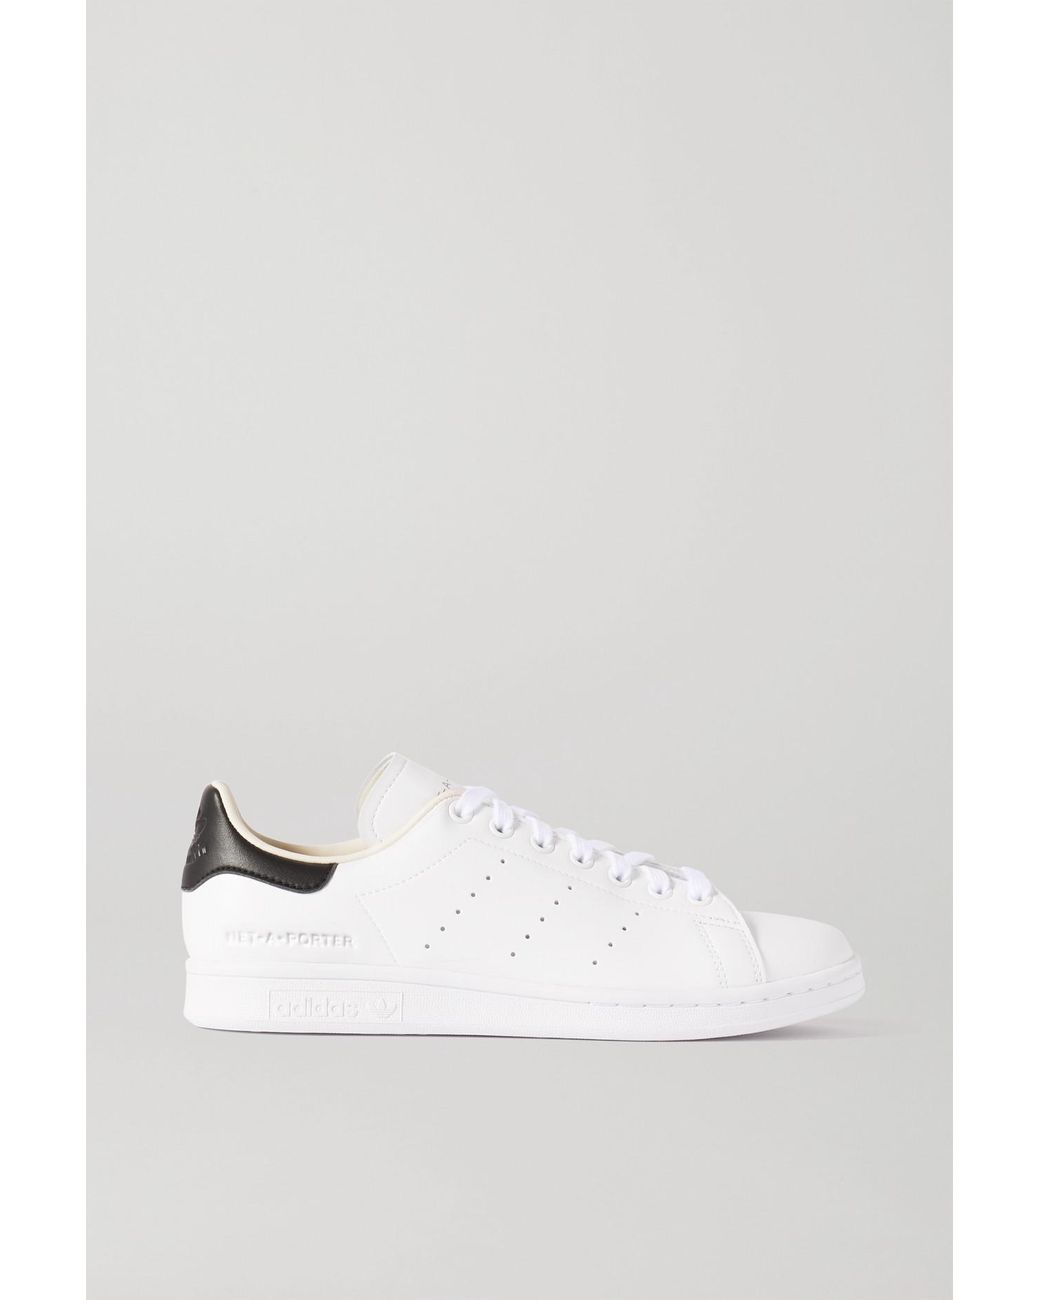 adidas Originals + Net-a-porter Stan Smith Vegan Leather Sneakers in White  | Lyst